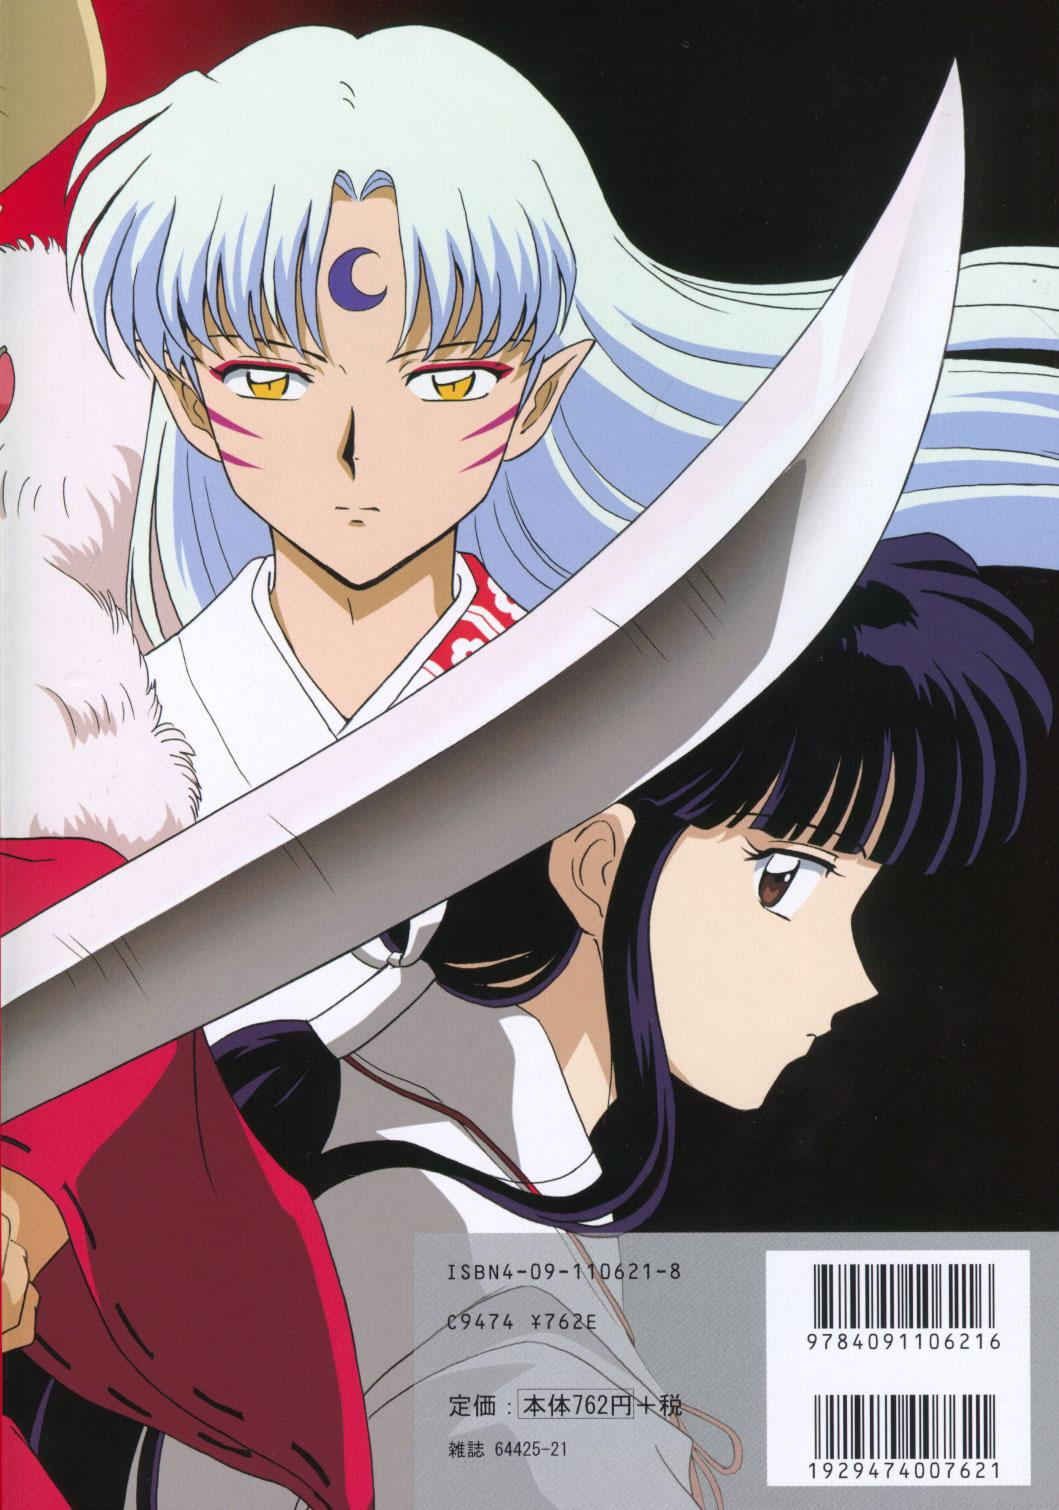 InuYasha Pictures, Pics, and Images #65 @ Anime Cubed